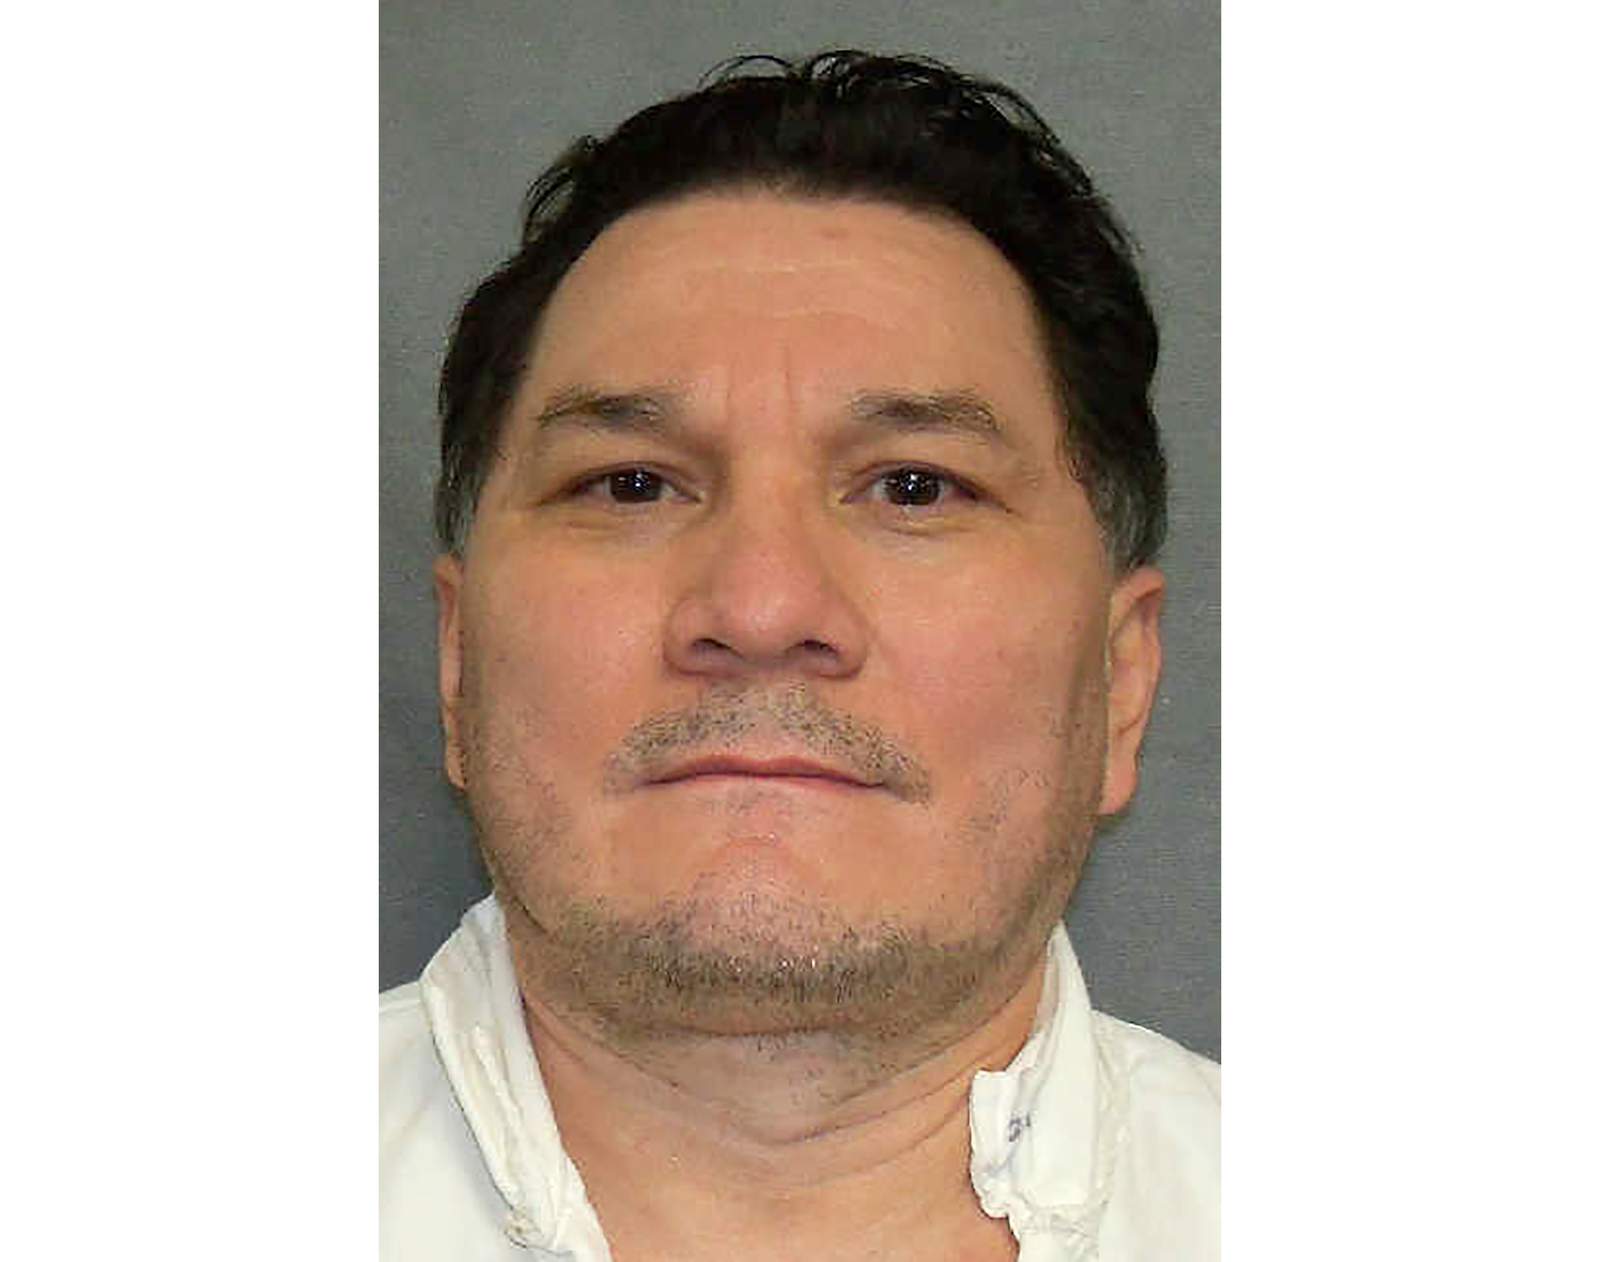 2nd Texas death row inmate declared intellectually disabled